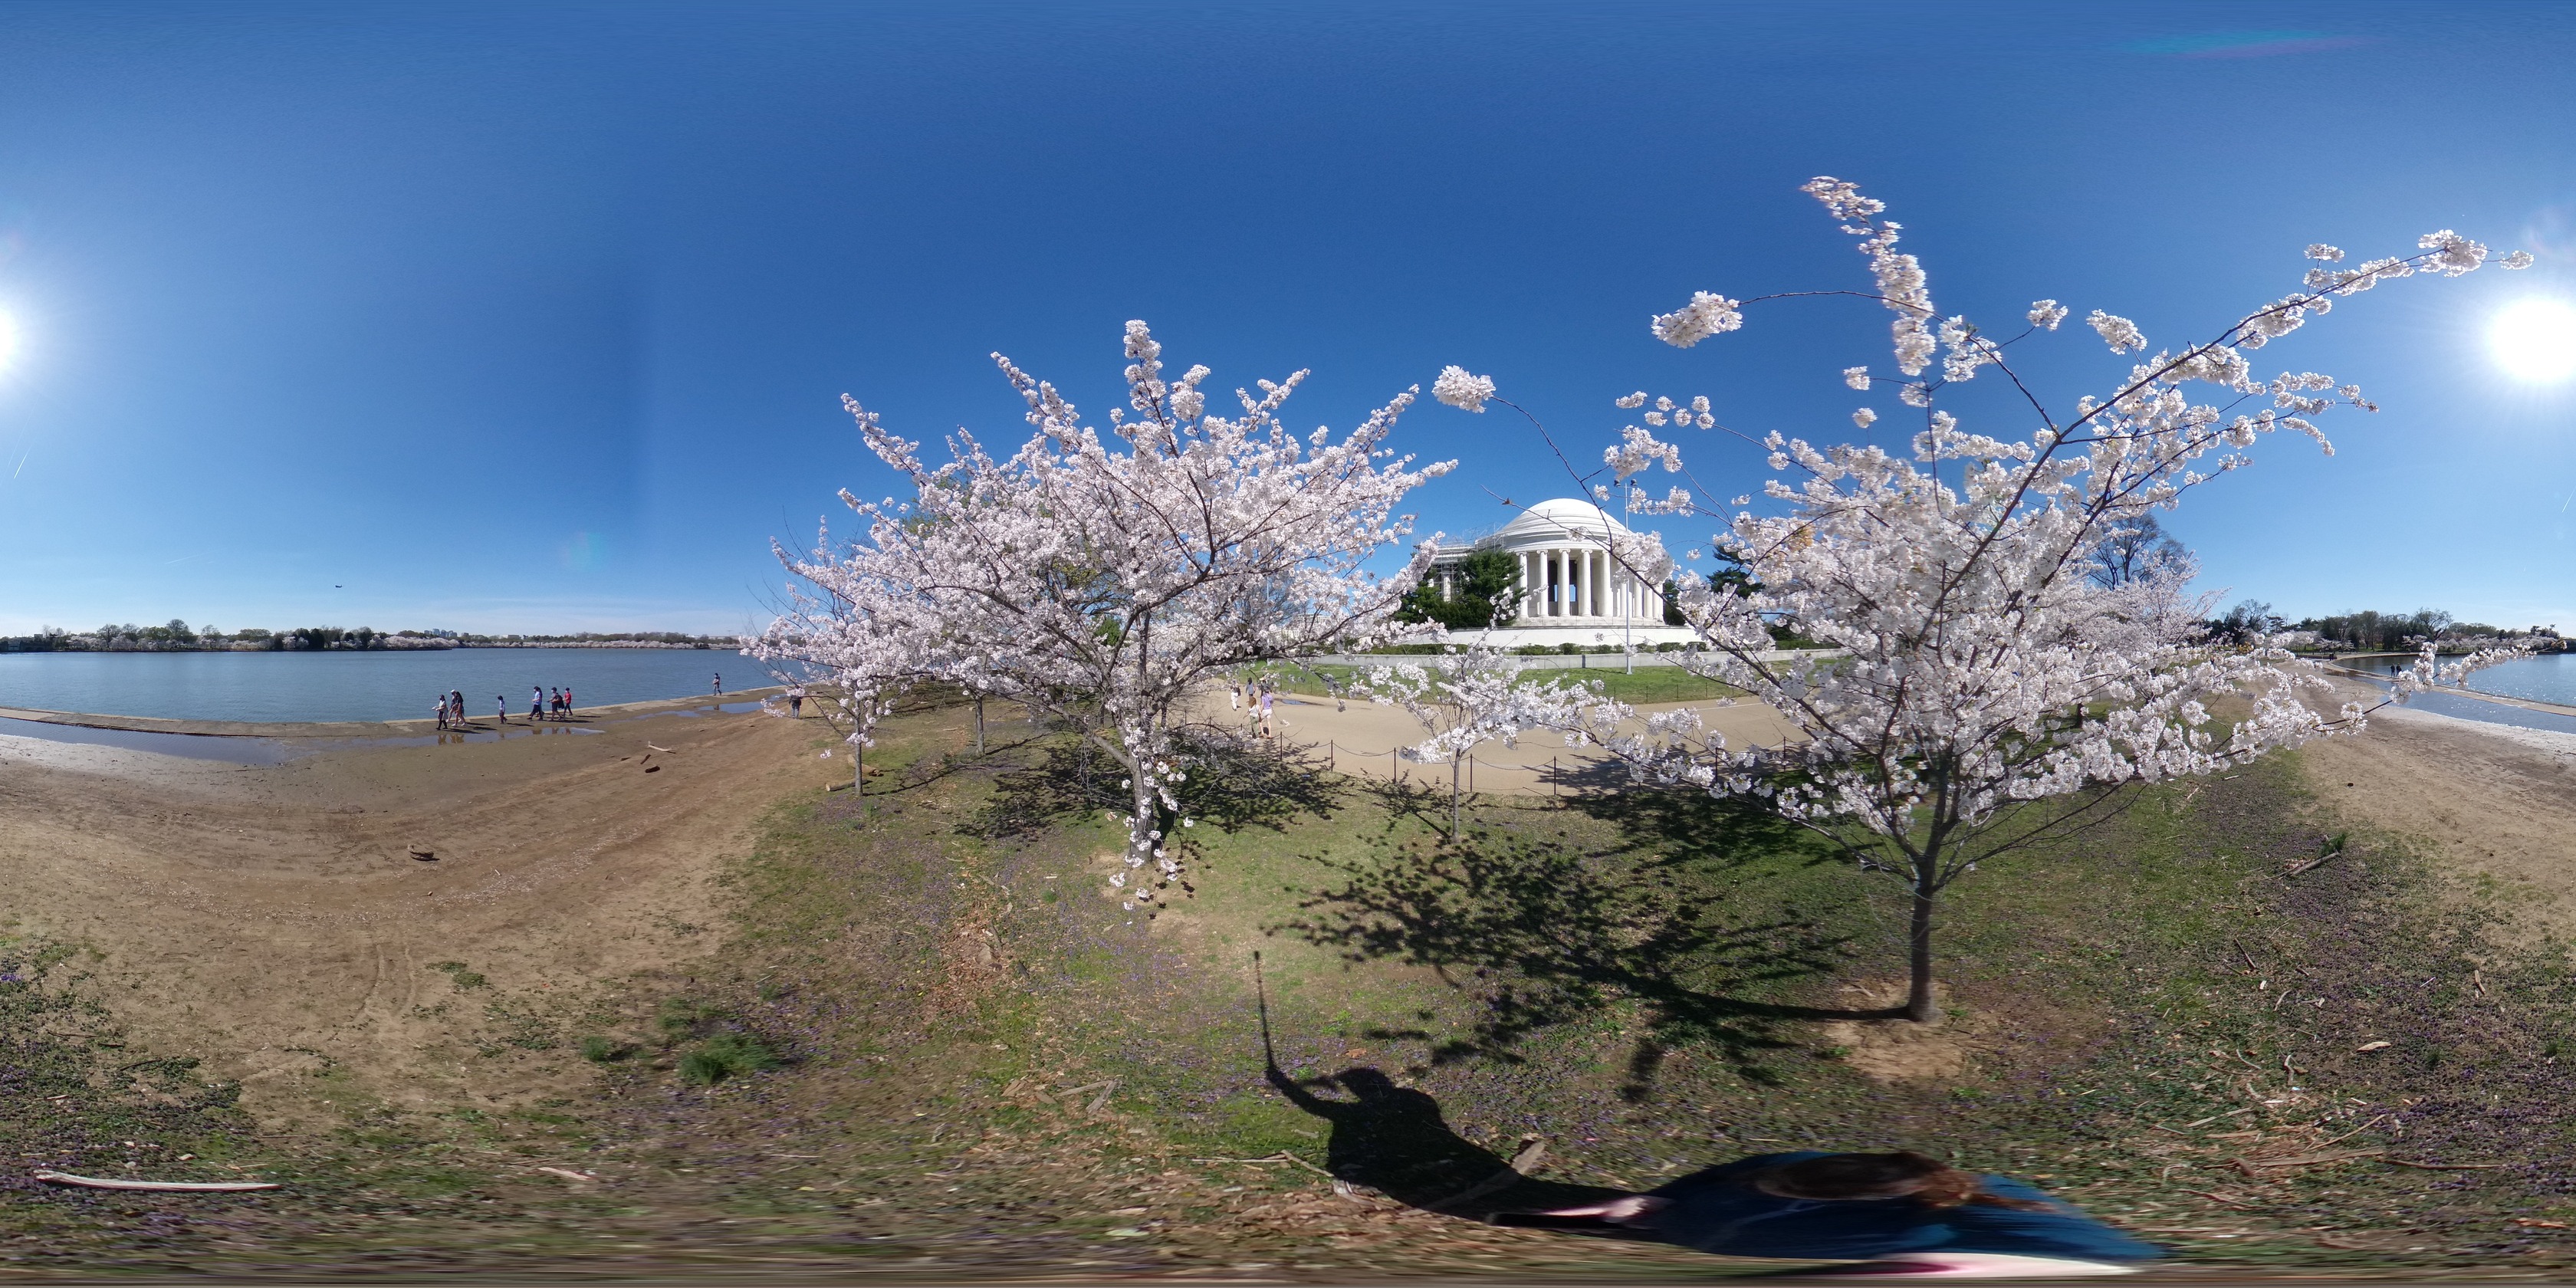 Spherical photo that includes people in walking near a large tidal basin and a person standing near small cherry blossom tress in full bloom. The Thomas Jefferson Memorial, which is a large domed classical-style structure, is nearby. 